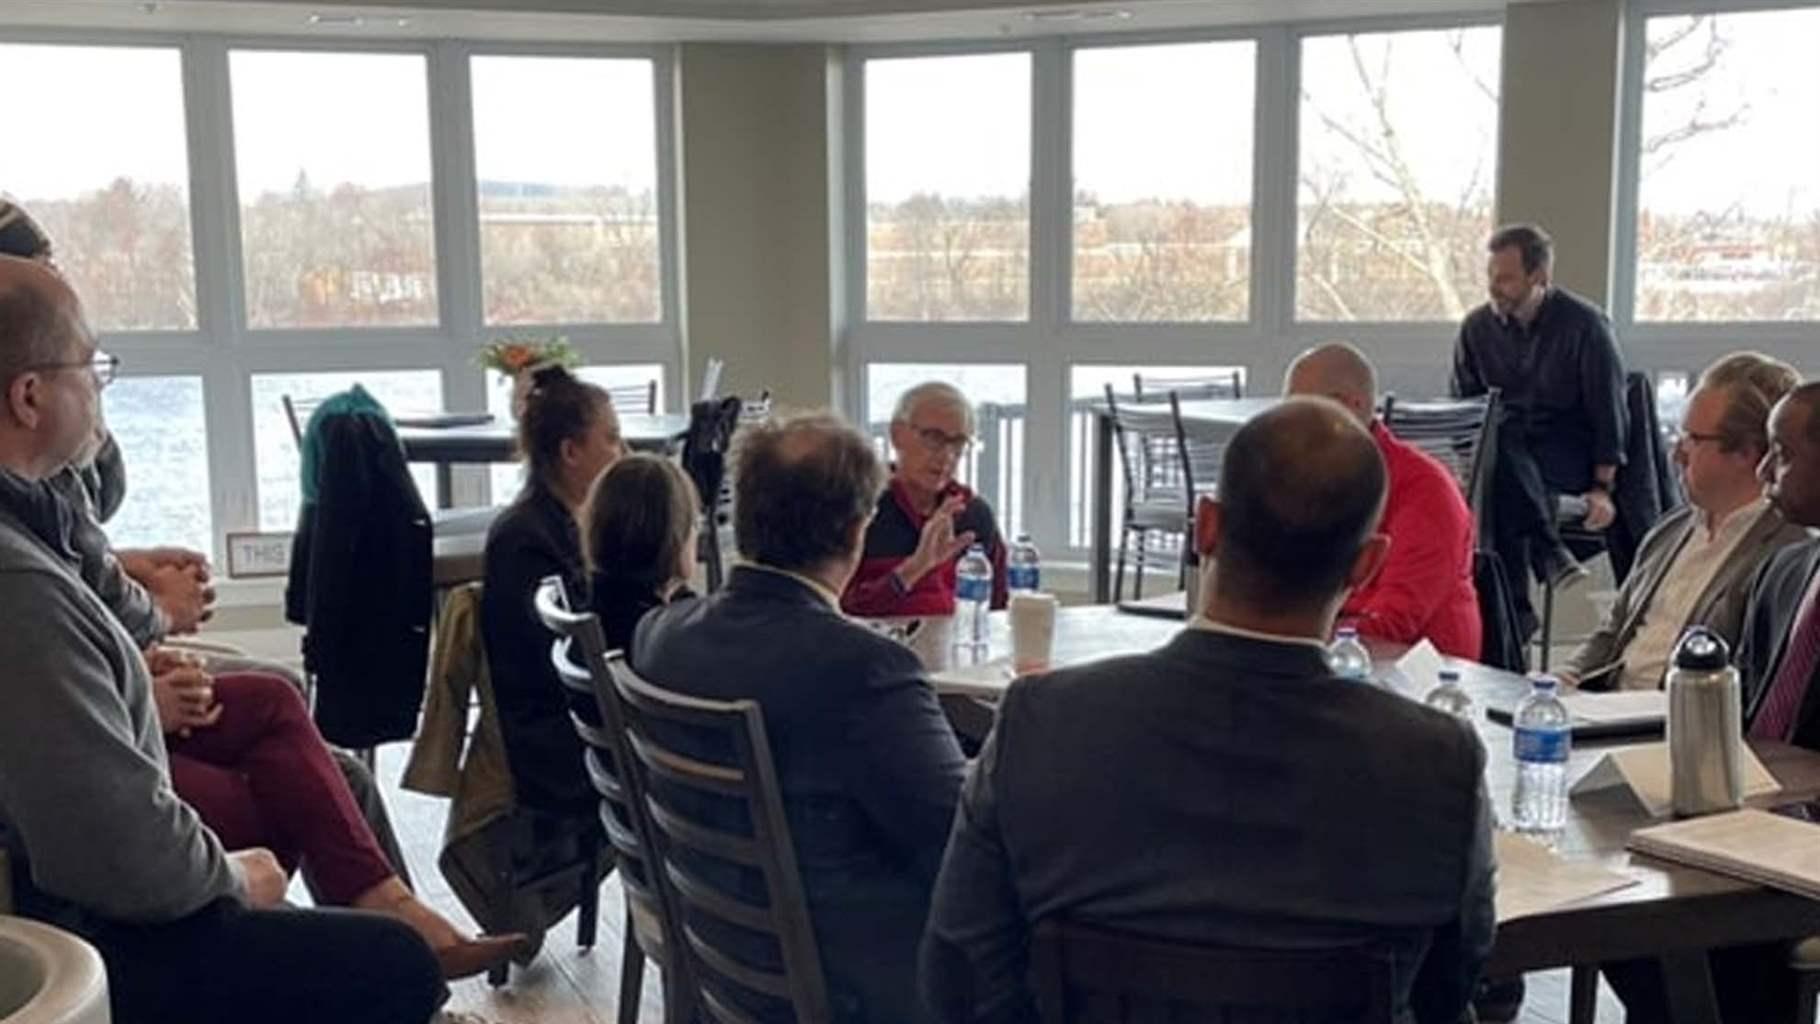 Wisconsin Governor Tony Evers (center) meets with elected officials and advocates in Wausau, Wisconsin, about his plan to create a chief resilience officer position to lead state resilience planning. Pew’s Zachary Bartscherer is among the attendees (second from right).